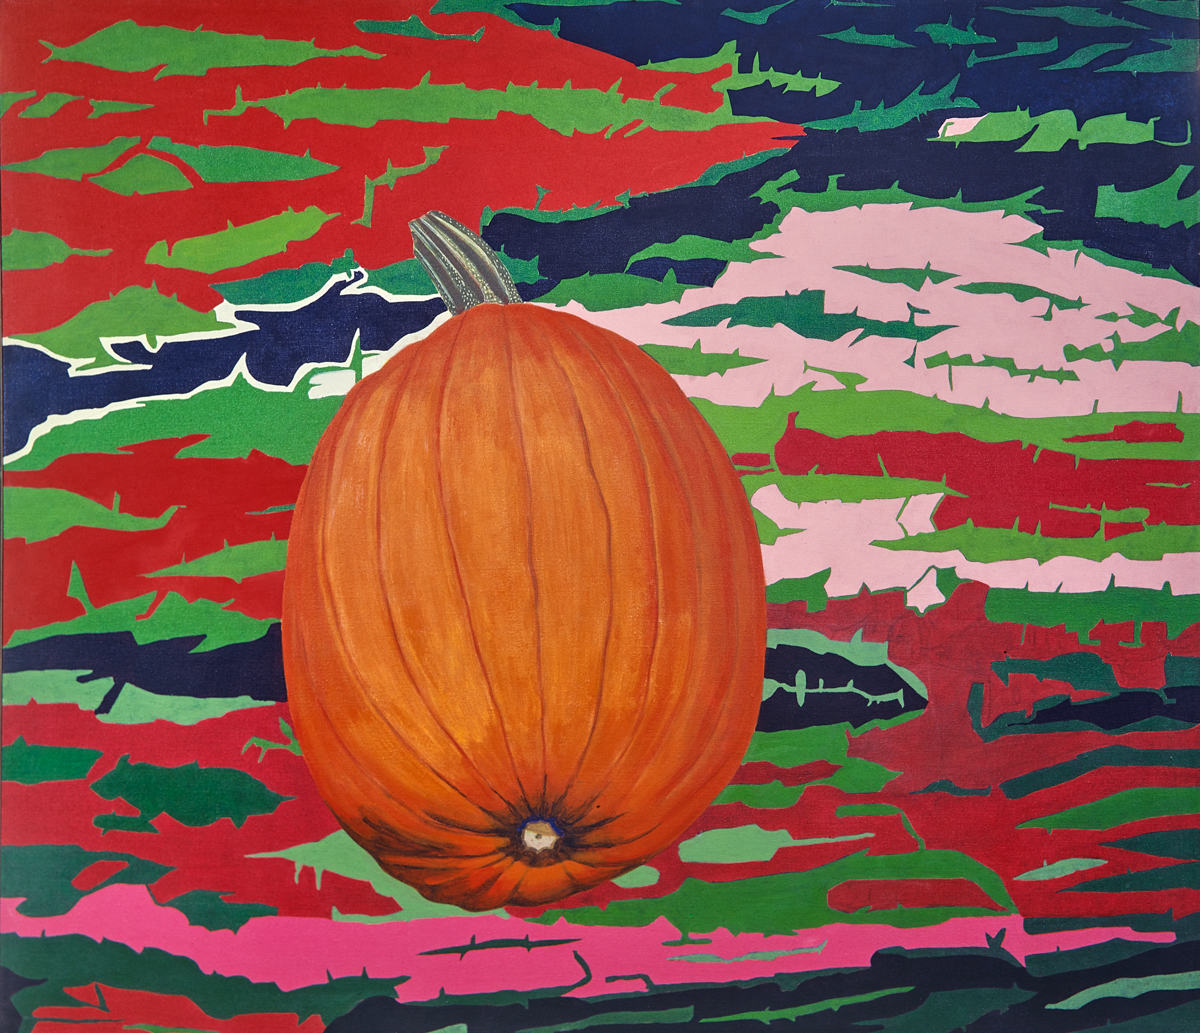 A painting of an orange pumpkin floating against an abstract sky in red, green, blue, and pink.